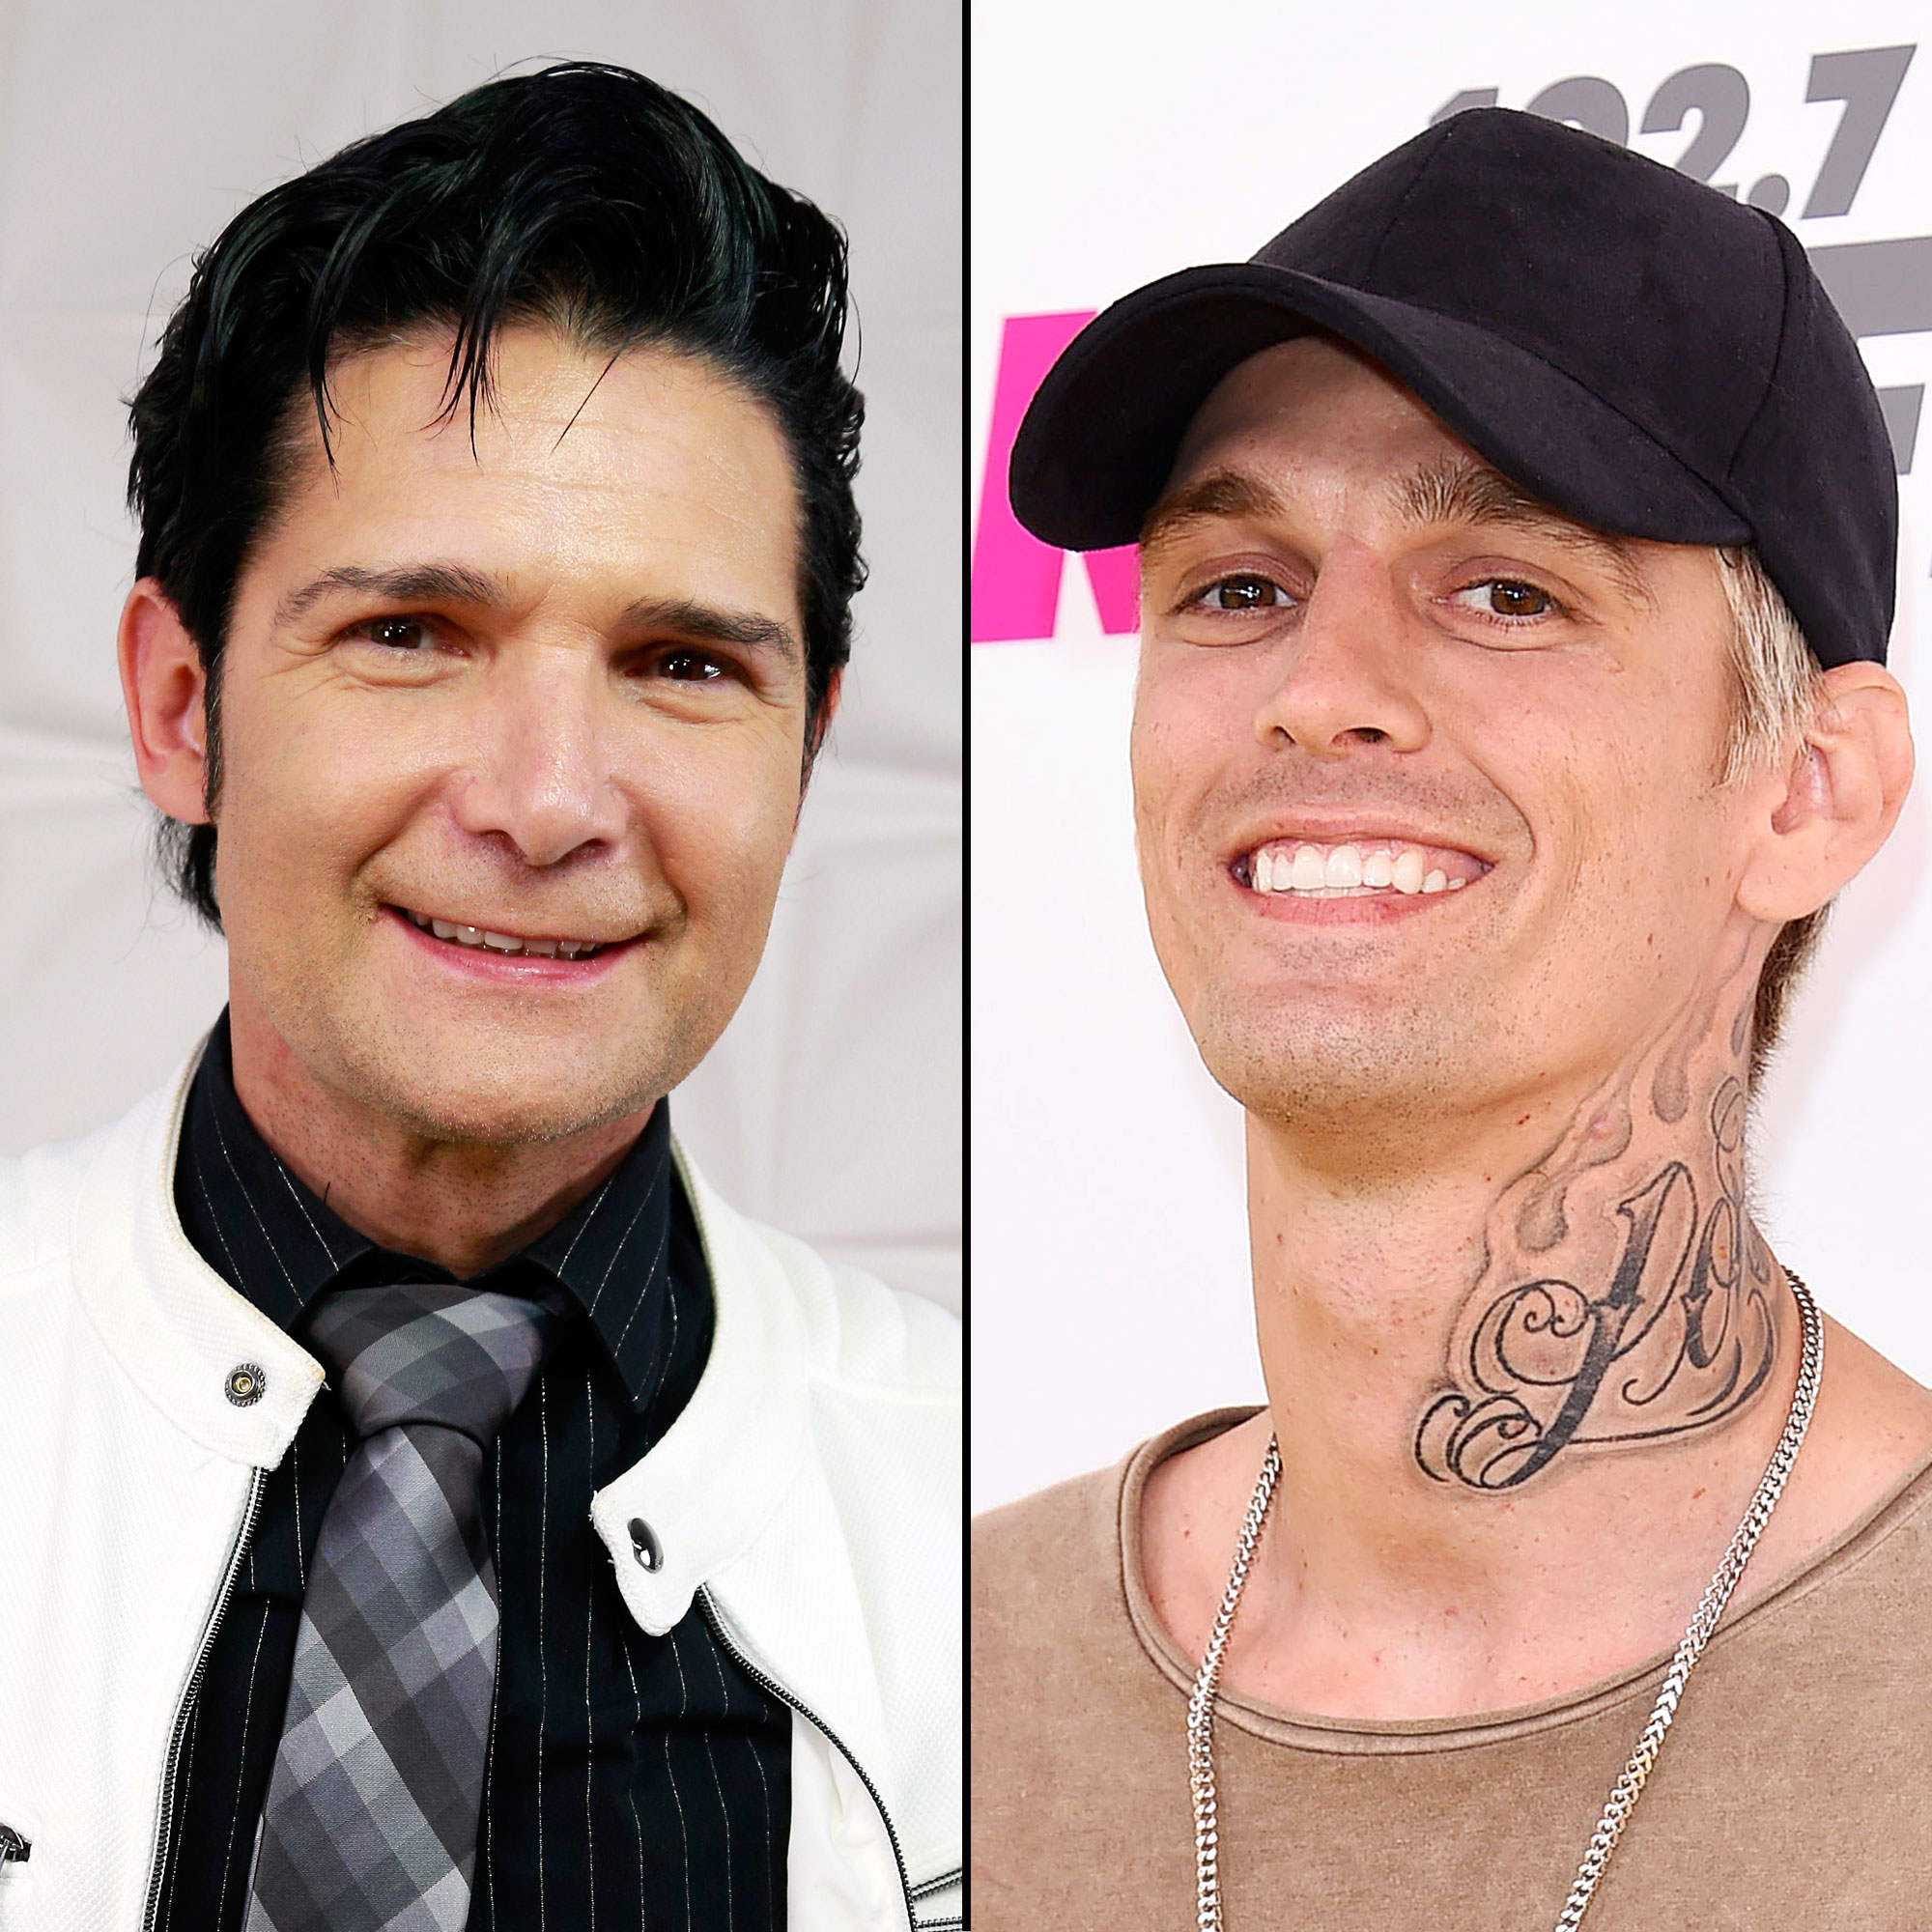 What is wrong with corey feldman